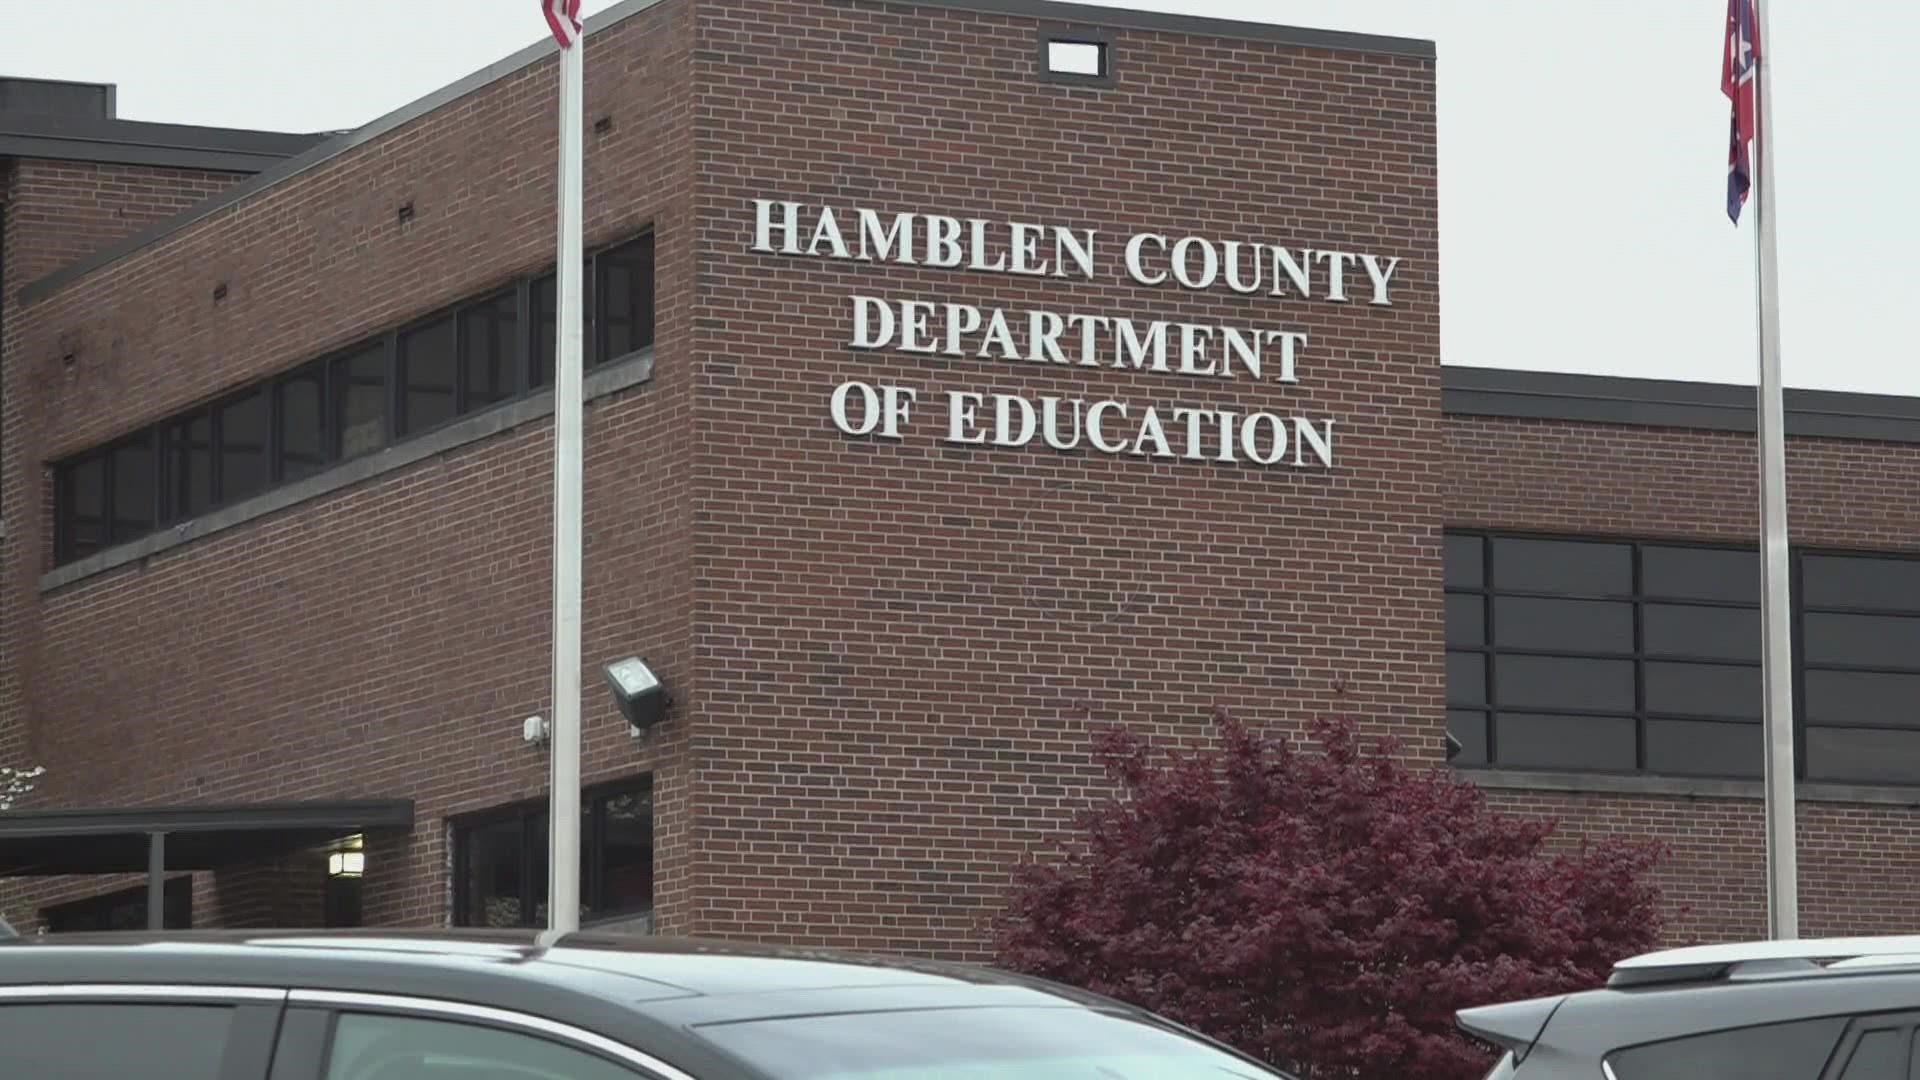 Hamblen County Schools said they interviewed the three finalists on April 7 and will make the final selection on Tuesday.